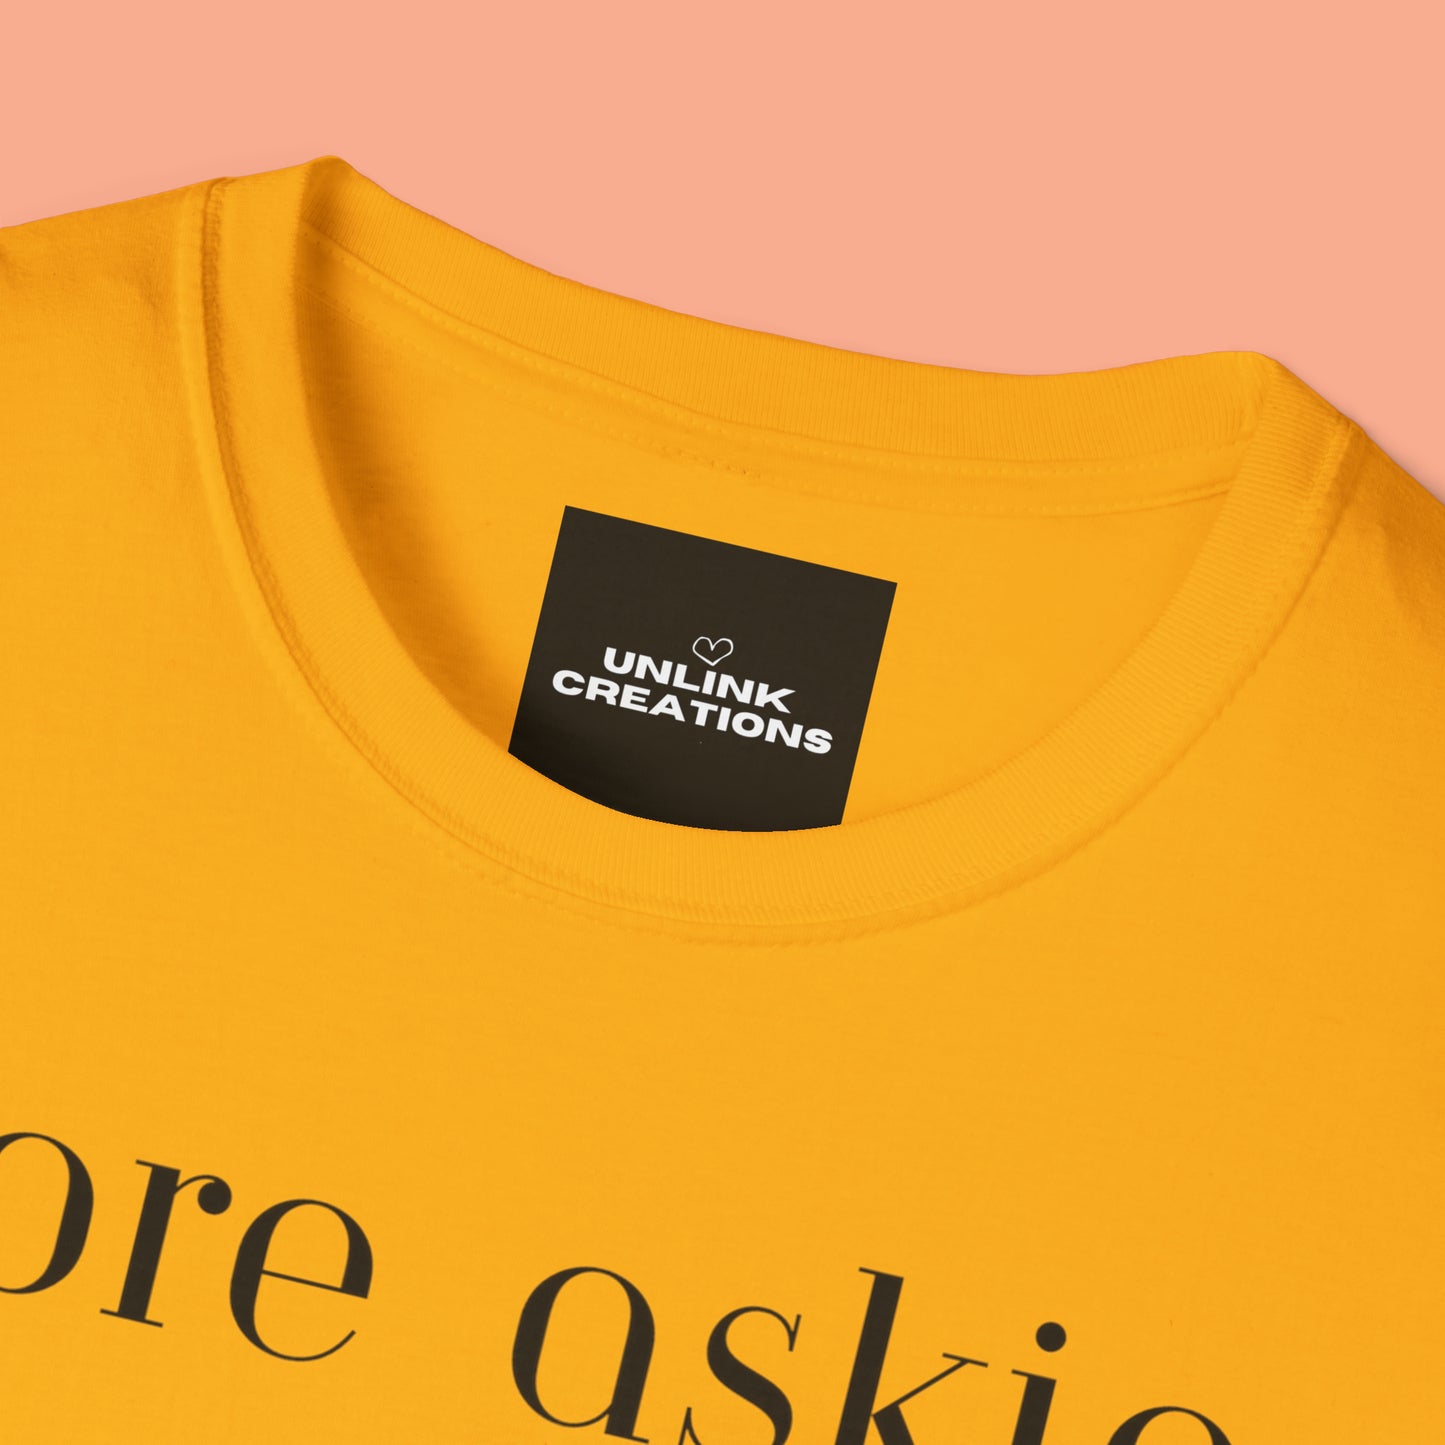 We can learn so much from others when we take the time to do ”more asking less telling”. A great reminder on this Unisex Softstyle T-Shirt.